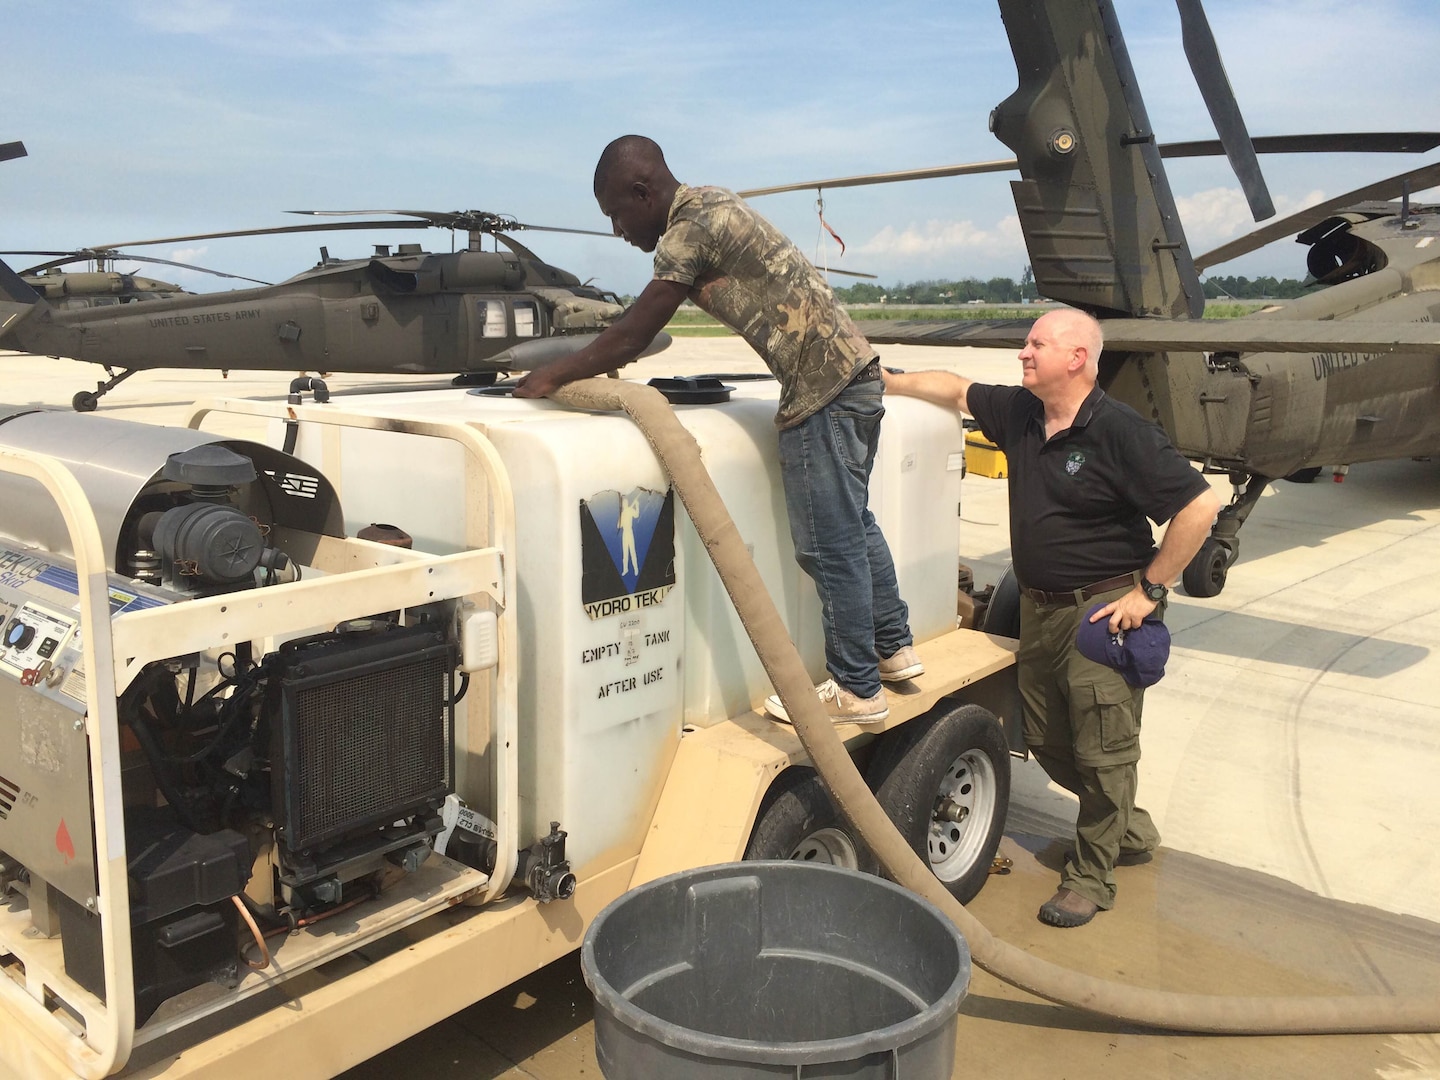 Craig Hill (right), an expeditionary contracting officer for DLA’s Joint Contingency Acquisition Support Office, observes a DLA Troop Support contractor fill an aircraft wash tank with non-potable water at Port-au-Prince, Haiti, October 2016. This practice conserved potable water for human consumption.